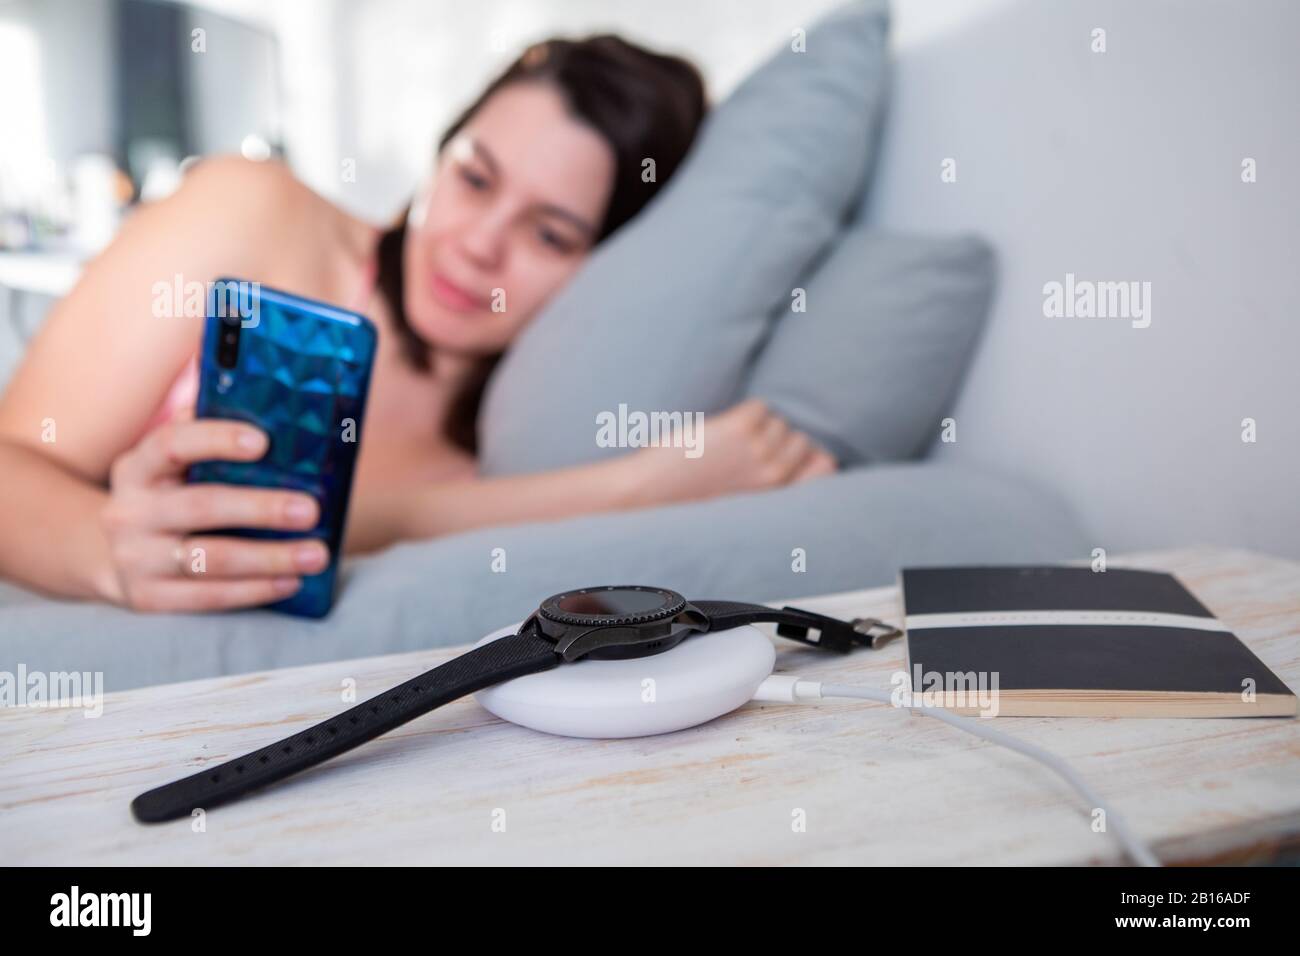 woman surfing internet on cellphone laying in bed smart watch on wireless charger Stock Photo